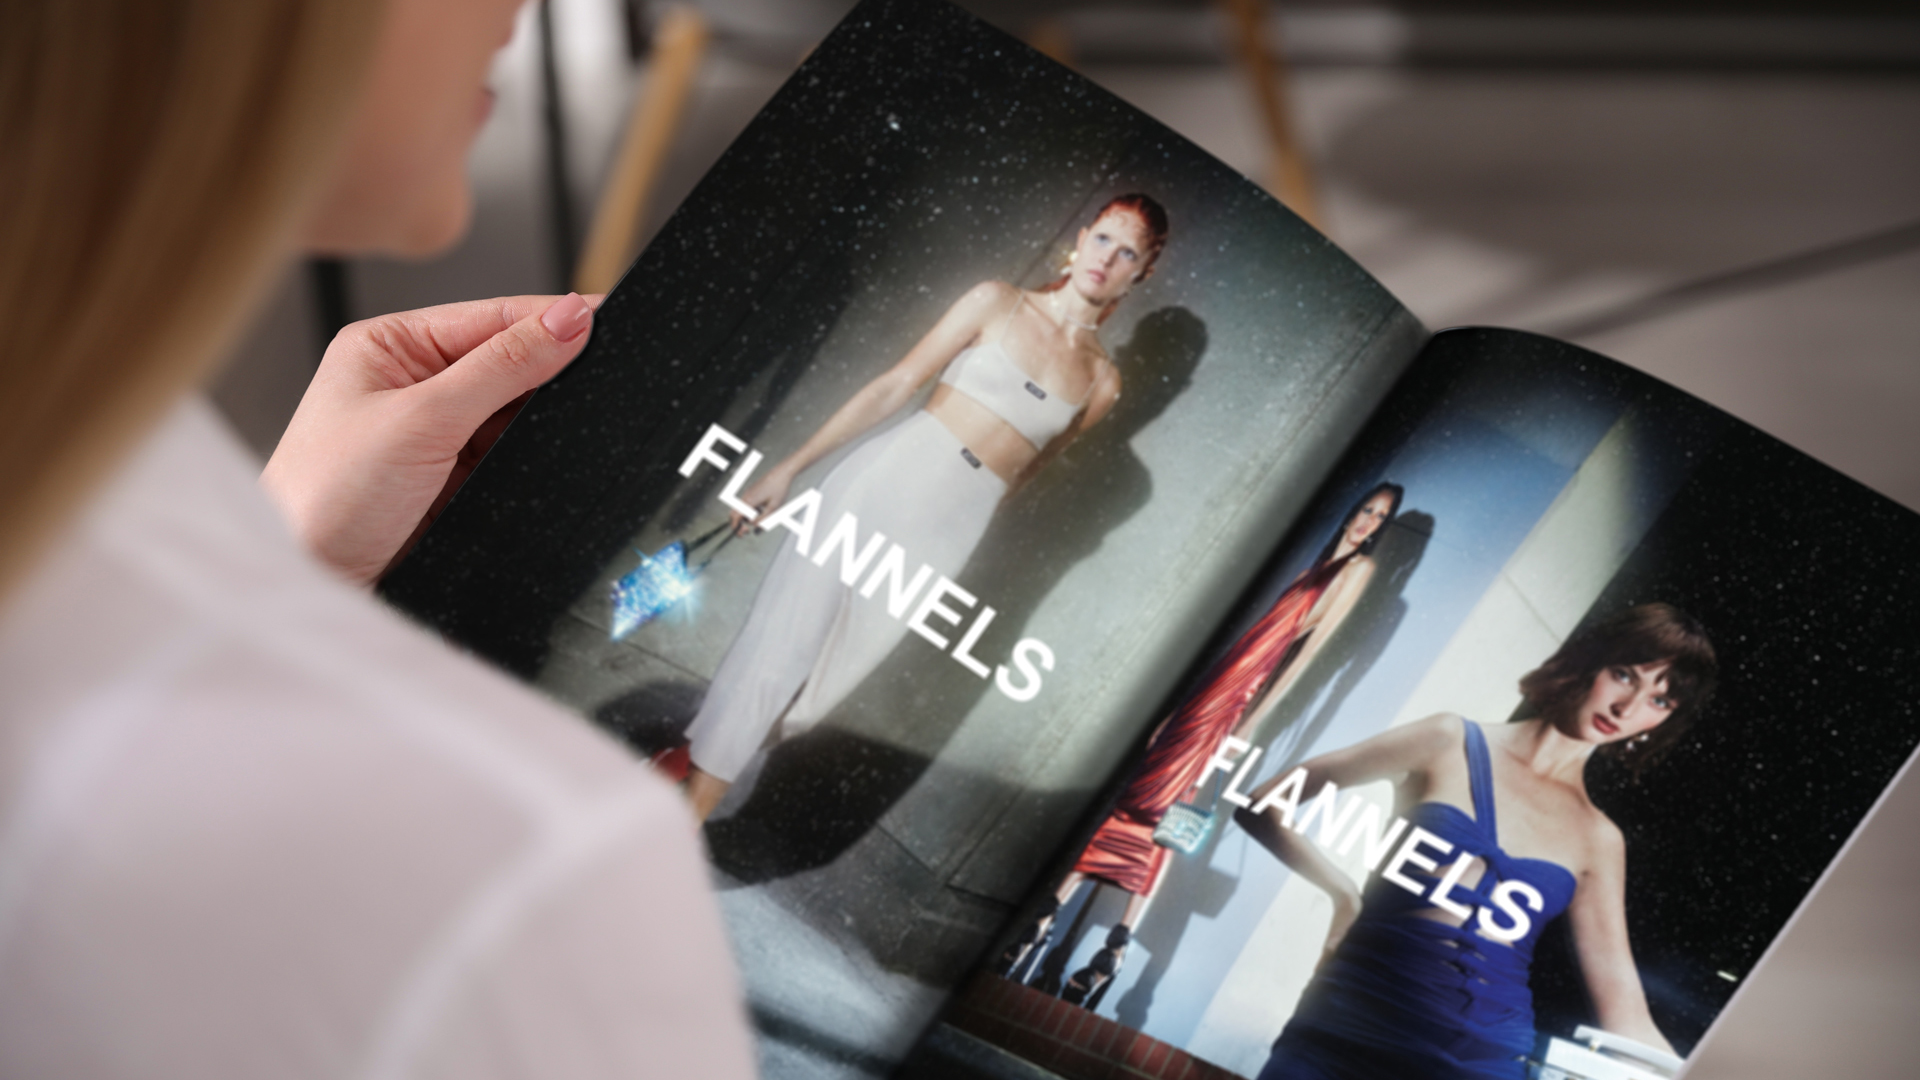 A woman reading a magazine showing two flannels advertisements